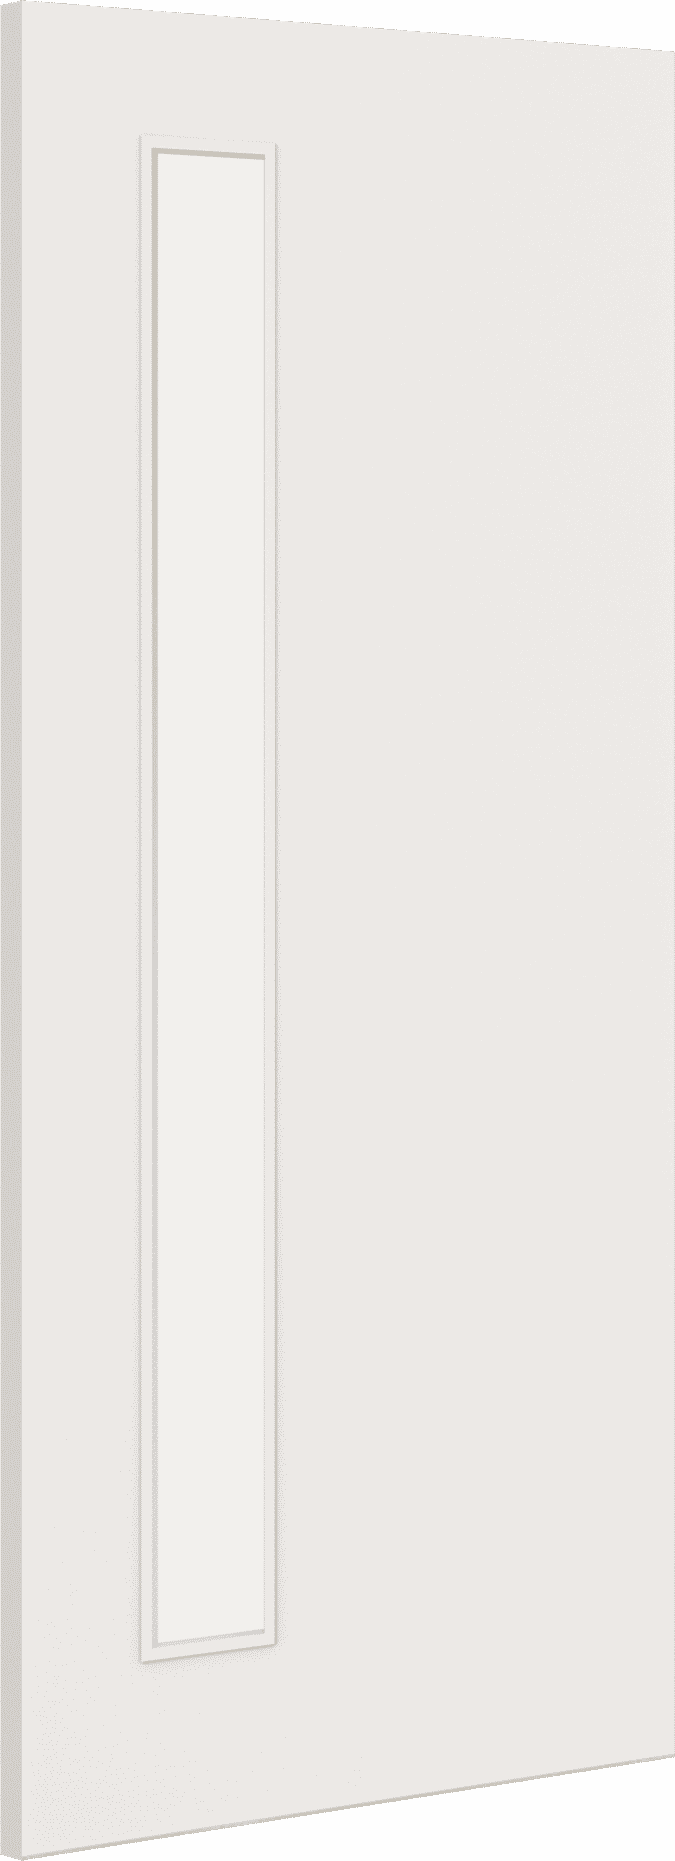 1981mm x 838mm x 44mm (33") Architectural Paint Grade White 06 Clear Glazed Fire Door Blank